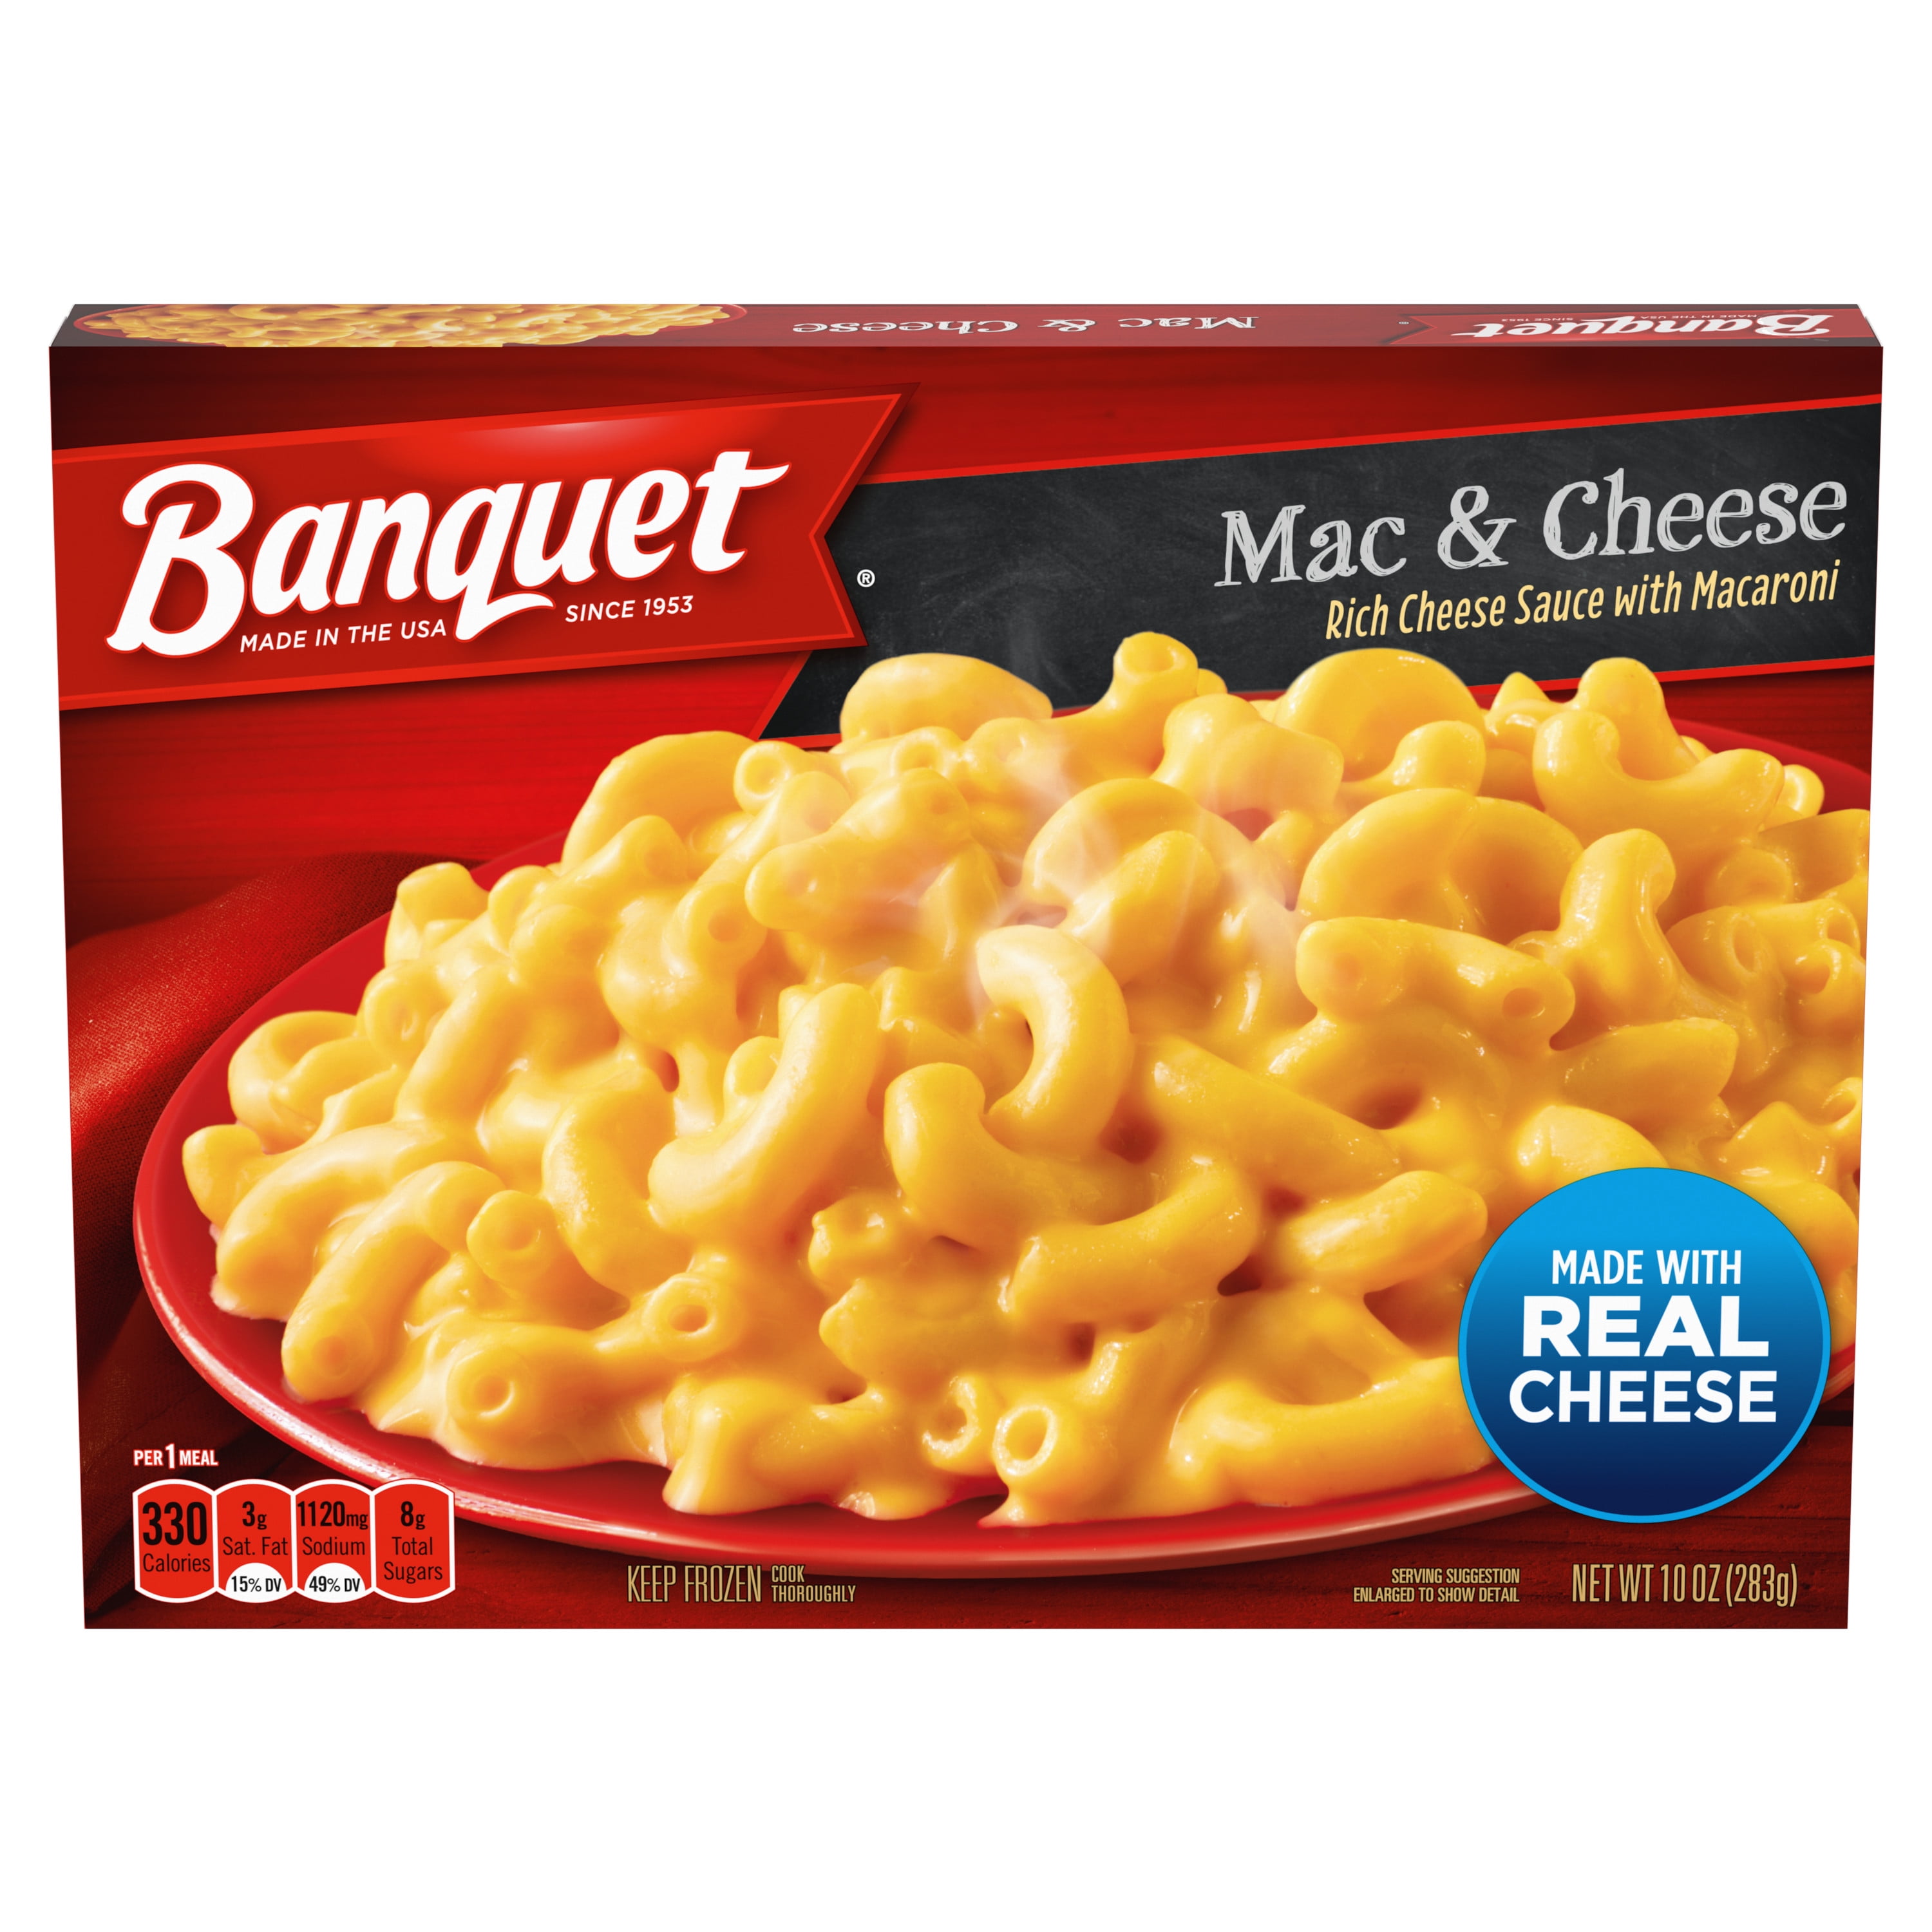 Macaroni & Cheese Frozen Meal